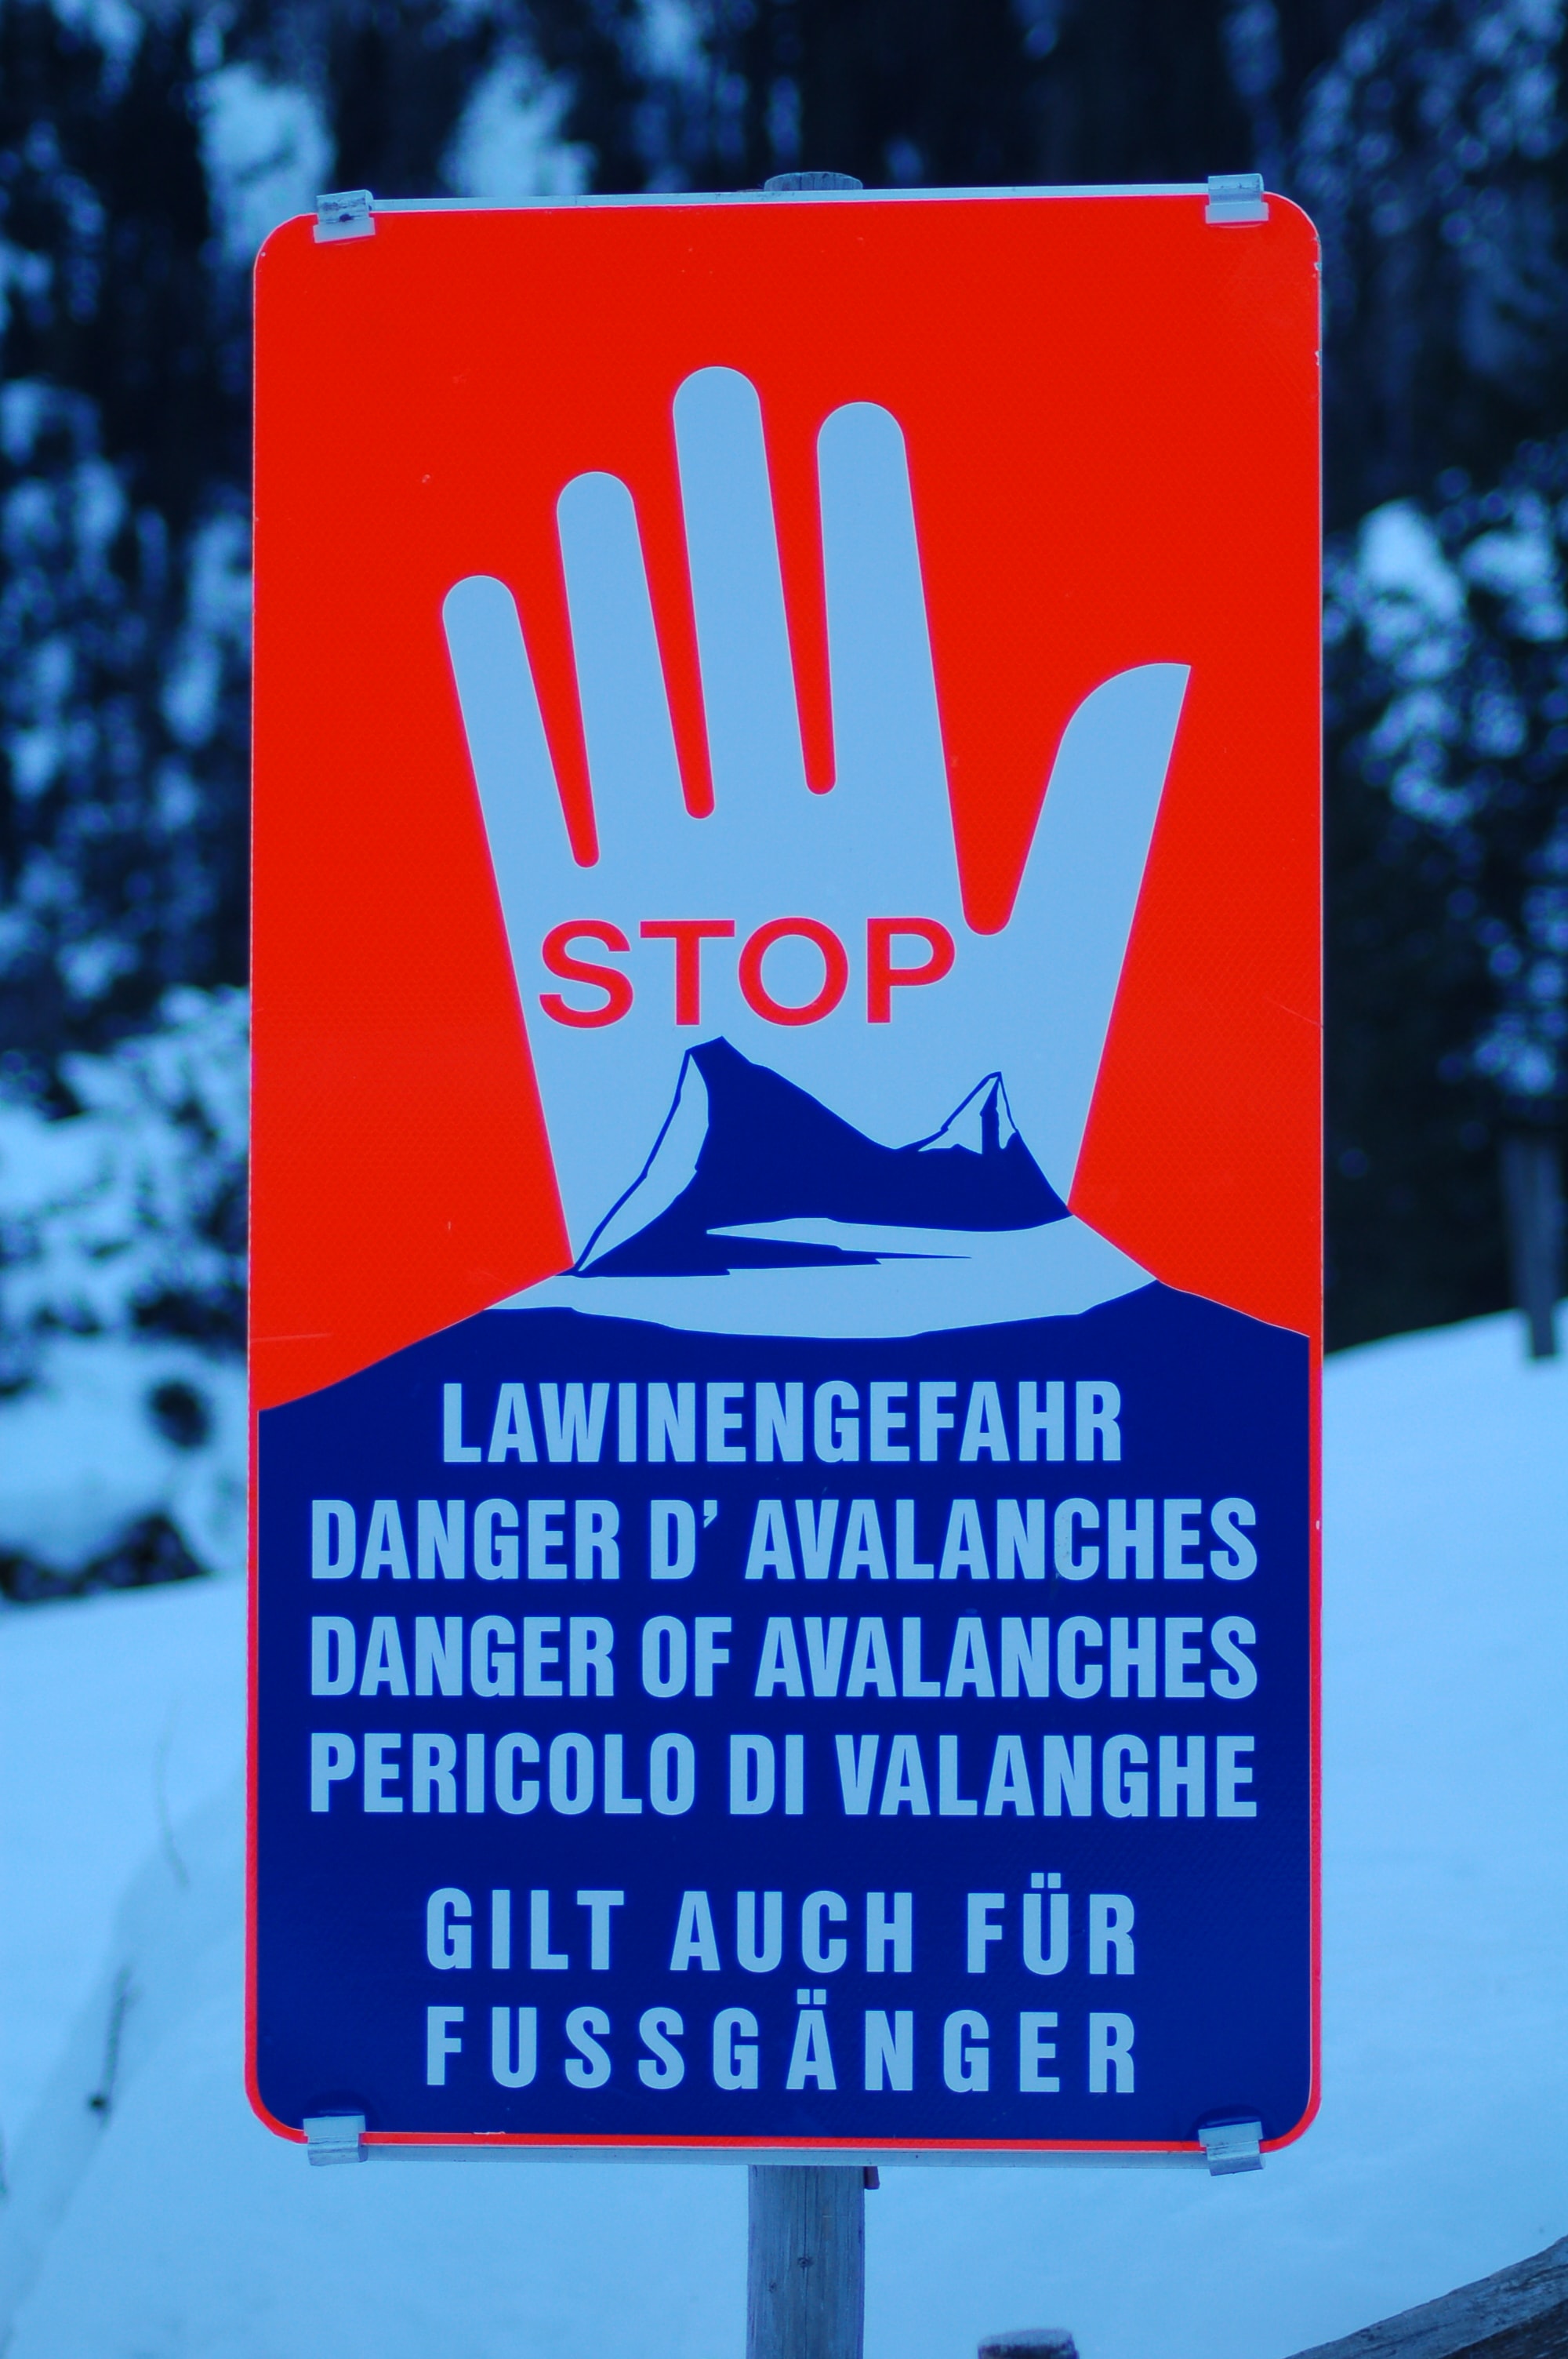 Lots of avalanche warning signage in the Alps. Source; Wikimedia